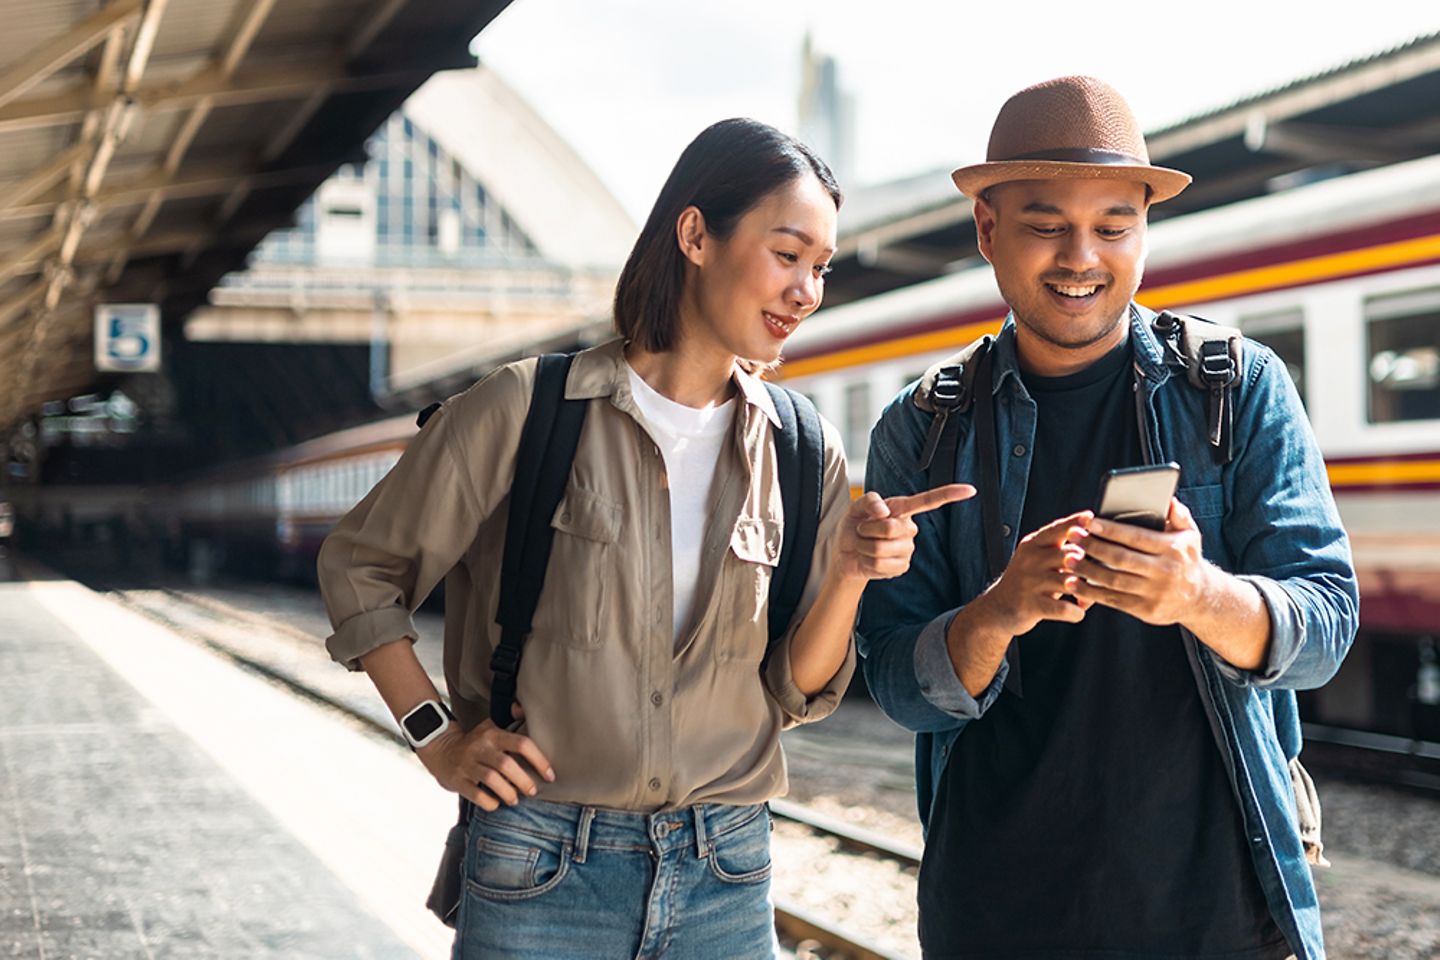 Two passengers looking at their phones for railway information